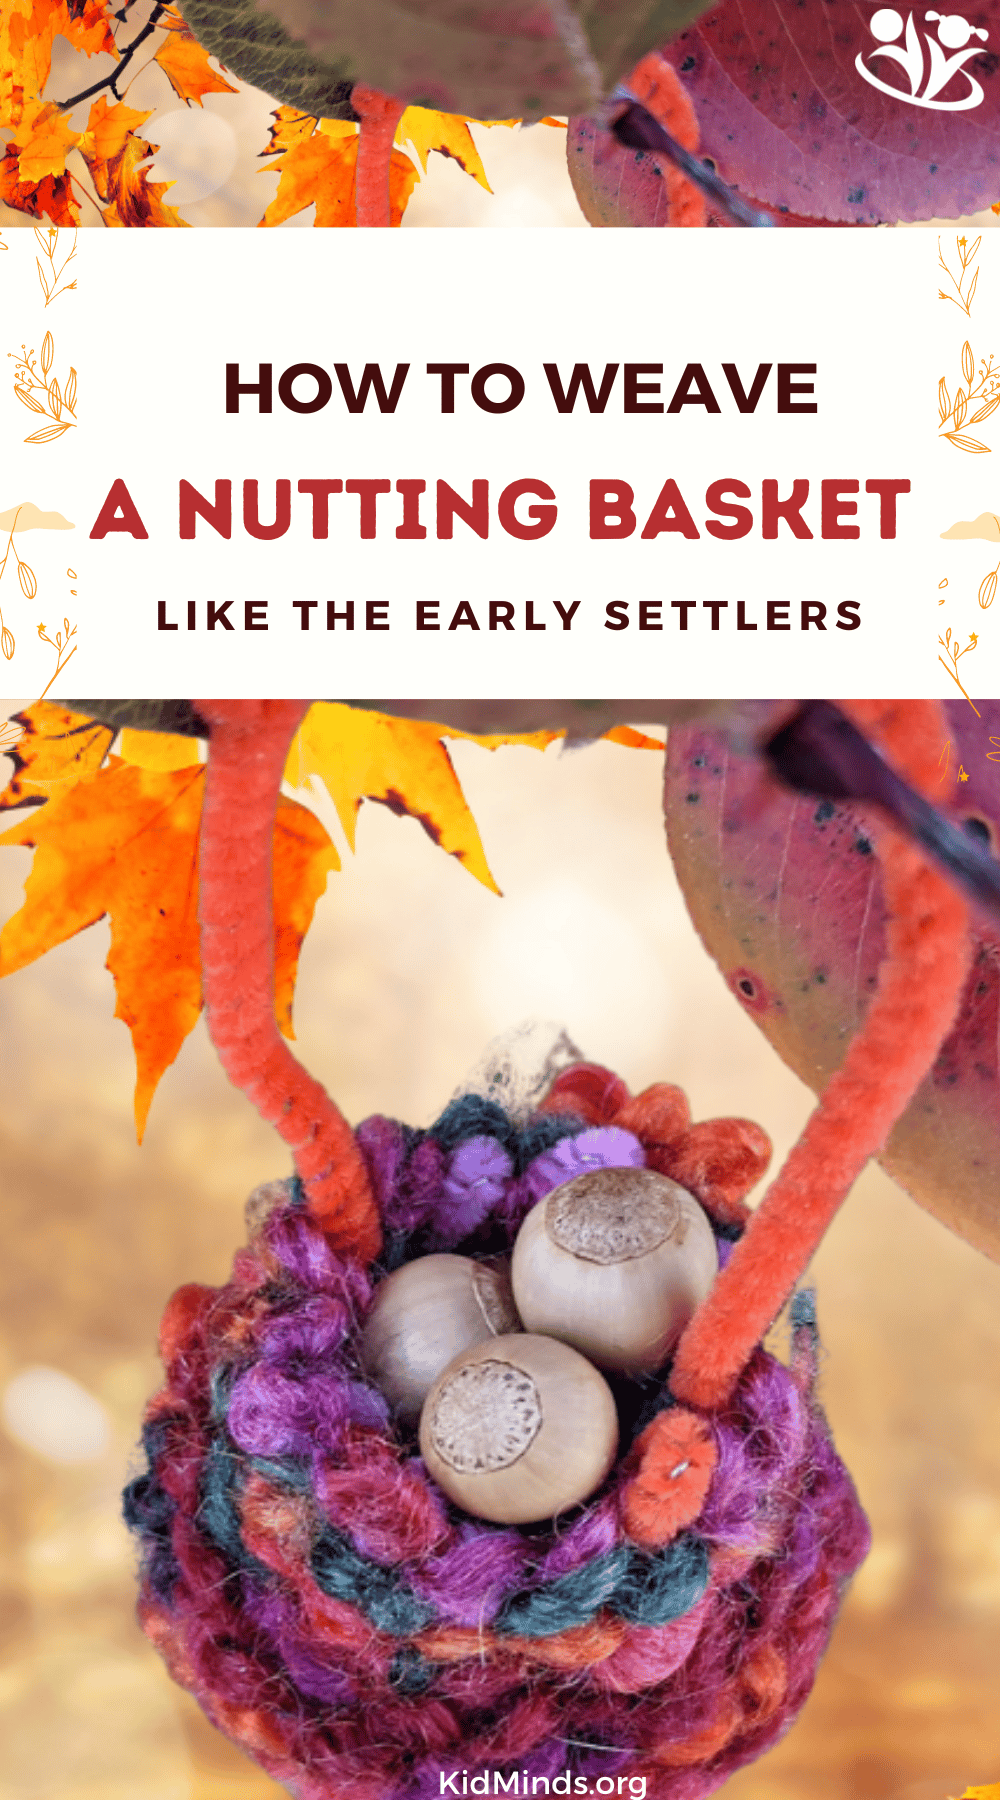 Here is an educational (and surprisingly meditative) activity to do around Thanksgiving to feel like an early settler: weave a nutting basket. #fall #kidsactivities #forkids #history #laughingkidslearn #kidminds #meditation